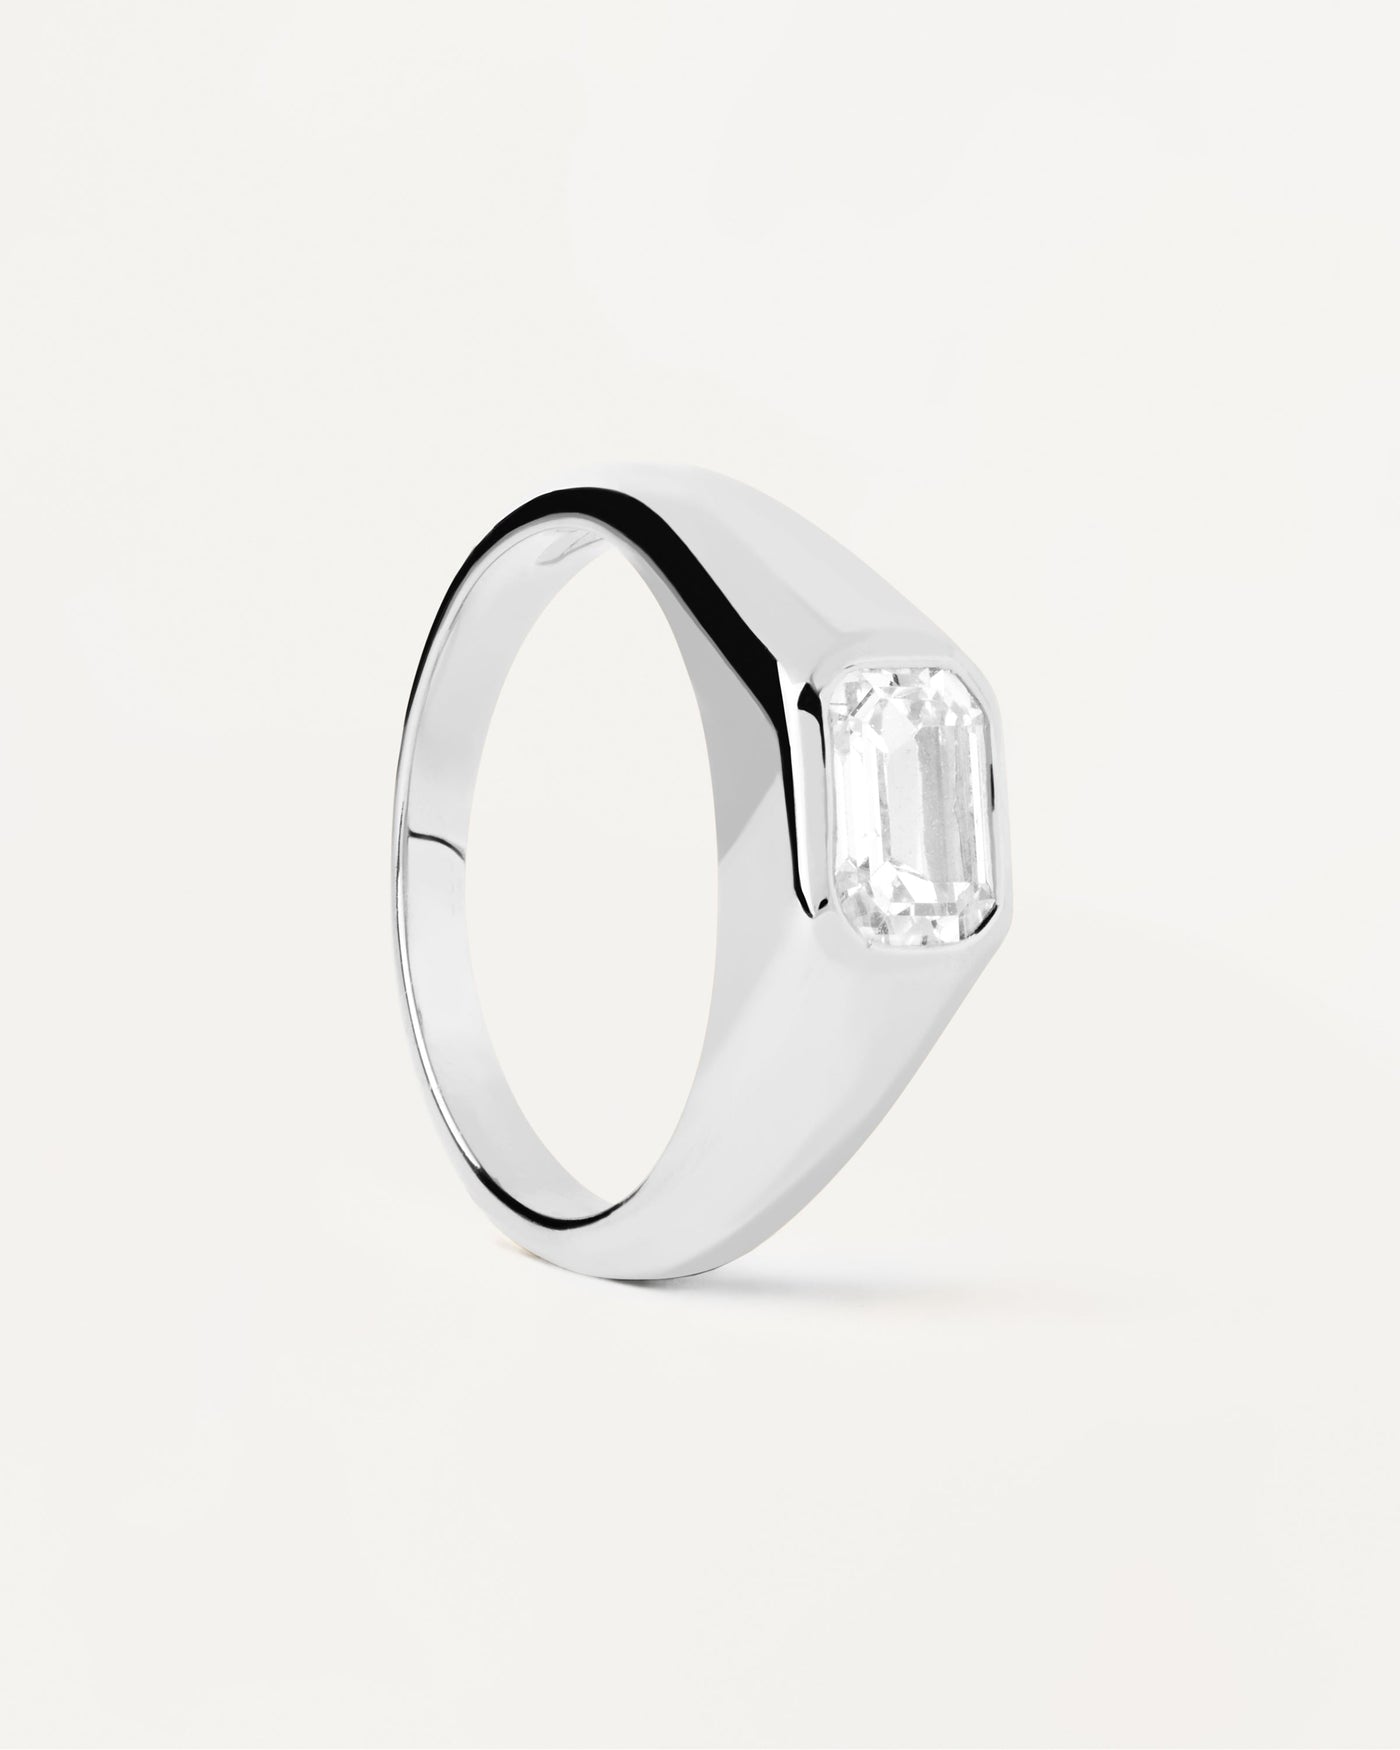 2023 Selection | Octagon Shimmer Stamp Silver Ring. Sterling silver signet ring with rectangular white zirconia. Get the latest arrival from PDPAOLA. Place your order safely and get this Best Seller. Free Shipping.